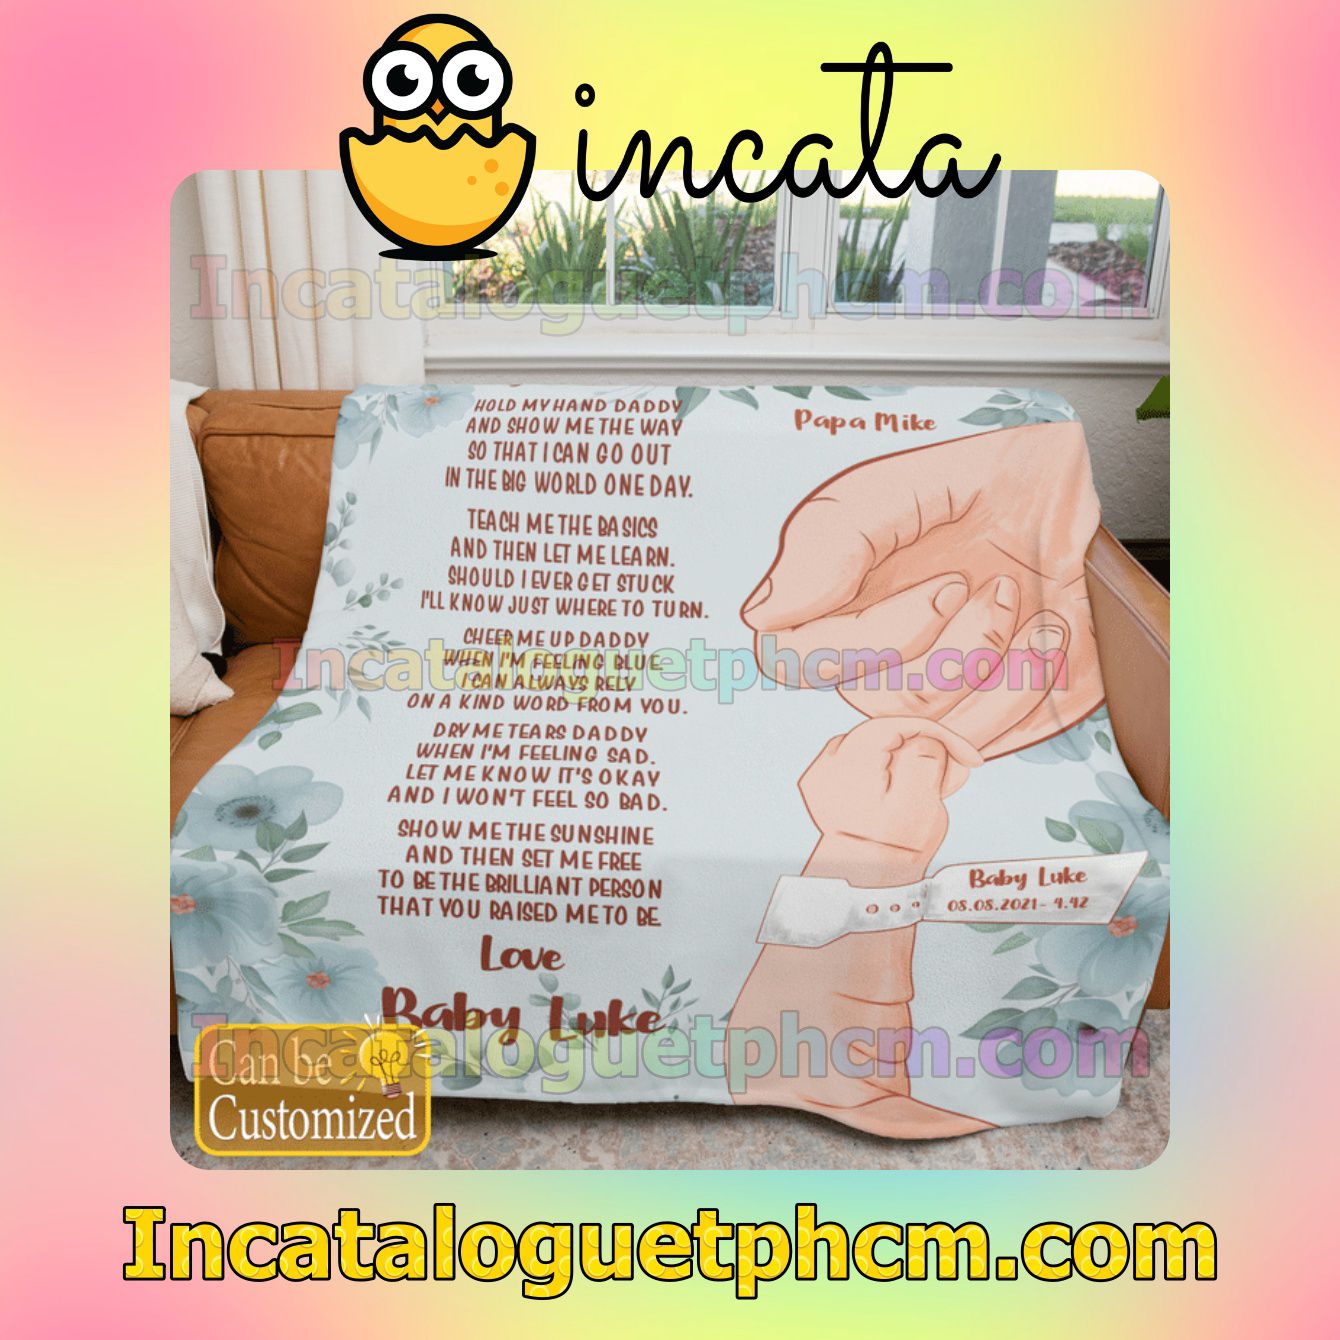 Check out Personalized My Daddy's Hand Gift Mom Dad Blankets